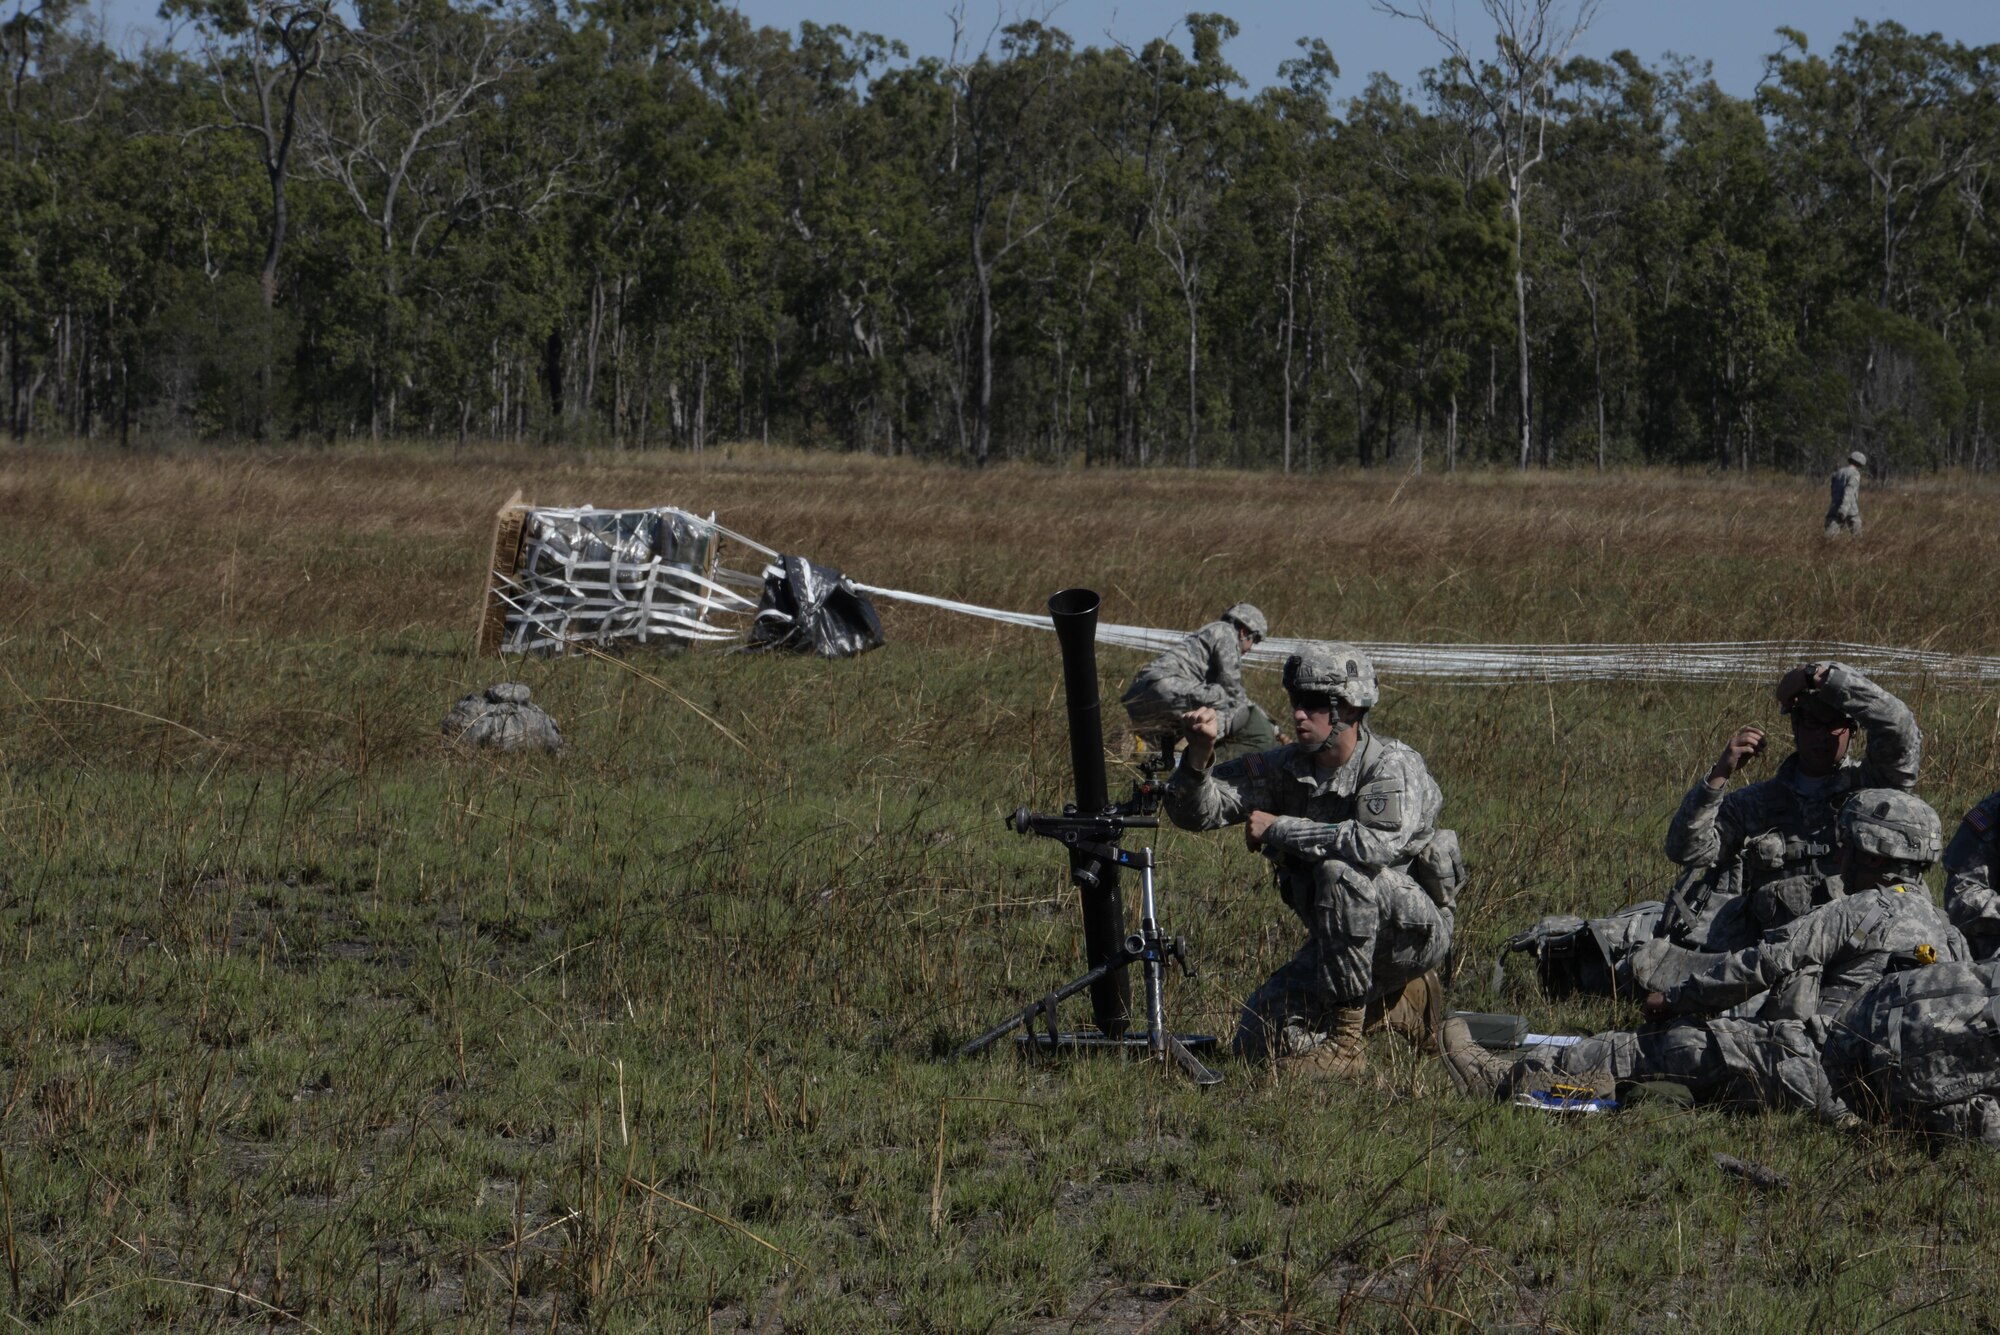 A mortarman from the U.S. Army 4th Battalion, 25th Infantry Airborne, sets up a mortar weapon after jumping from a C-17 Globemaster III aircraft during exercise Talisman Sabre in Northern Territory, Australia, July 8, 2015. Exercises such as Talisman Sabre 2015 provide realistic, relevant training which is necessary to maintain regional security, peace and stability. (U.S. Air Force photo by Senior Airman Stephen G. Eigel)